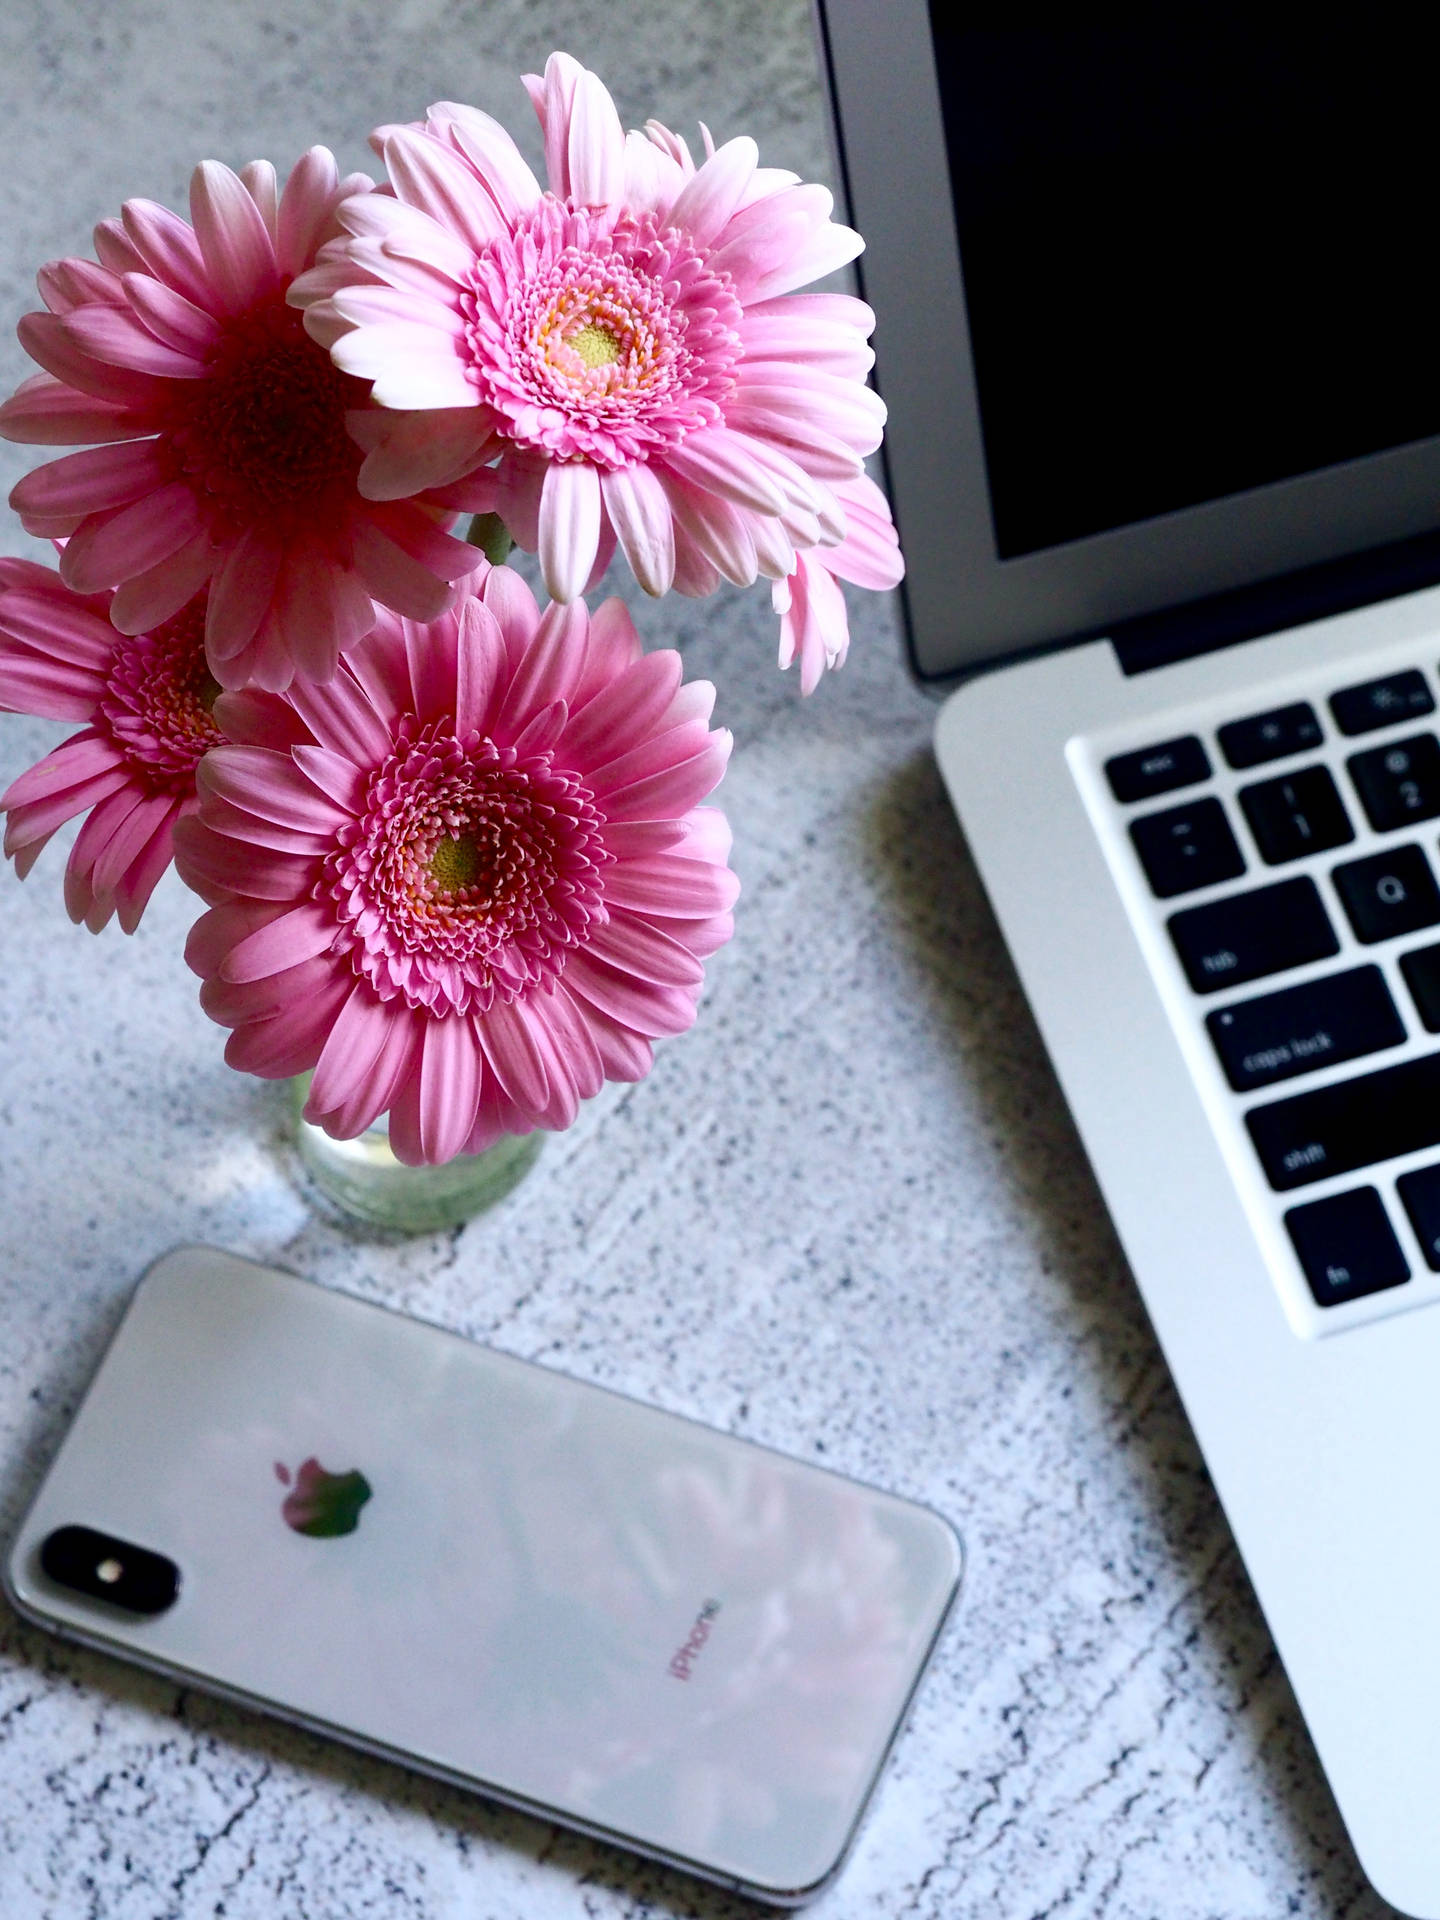 Cool Iphone Pink Daisies Background